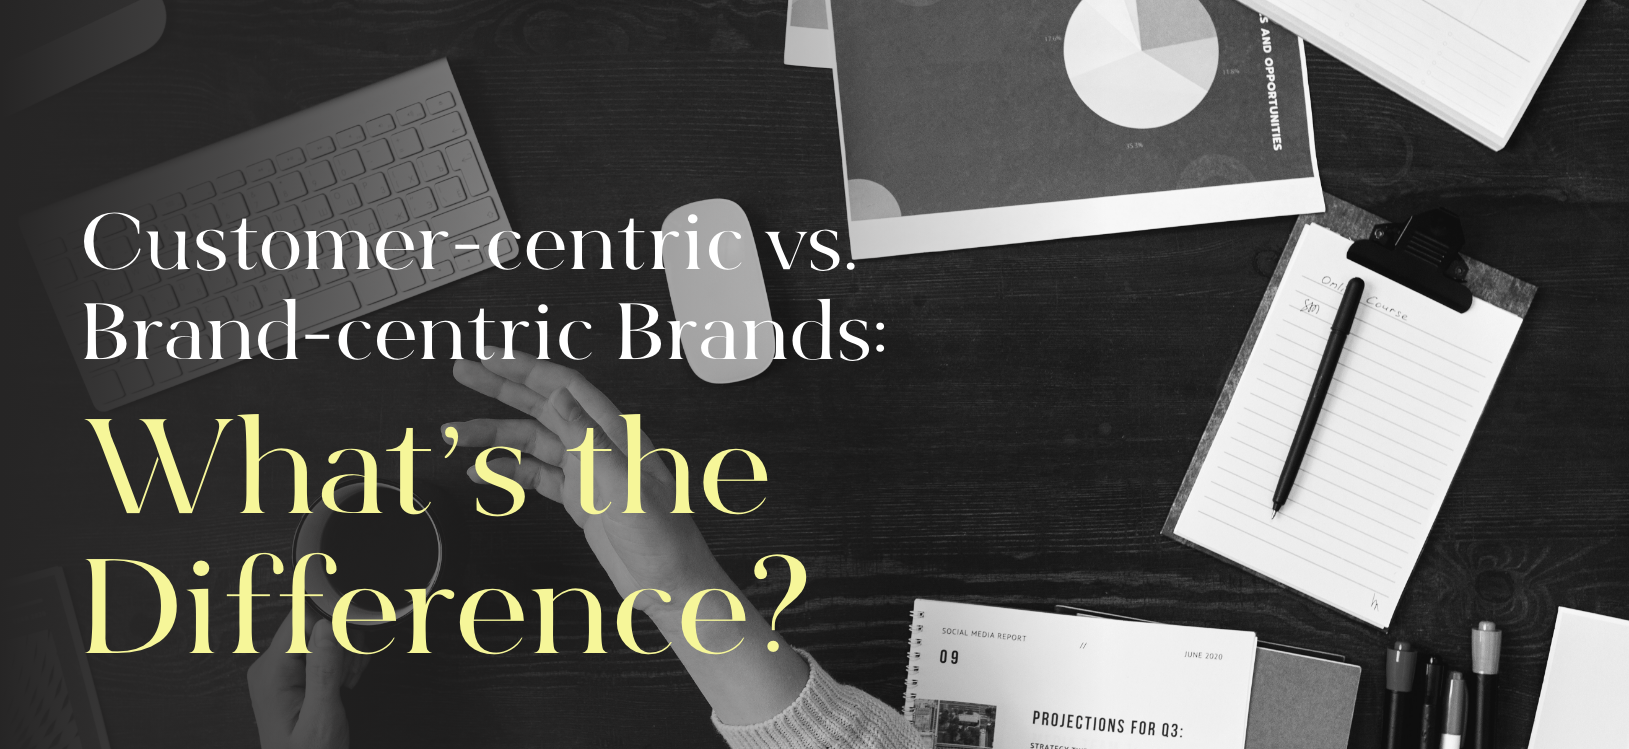 Customer Centric Vs Brand Centric Brands Whats The Difference